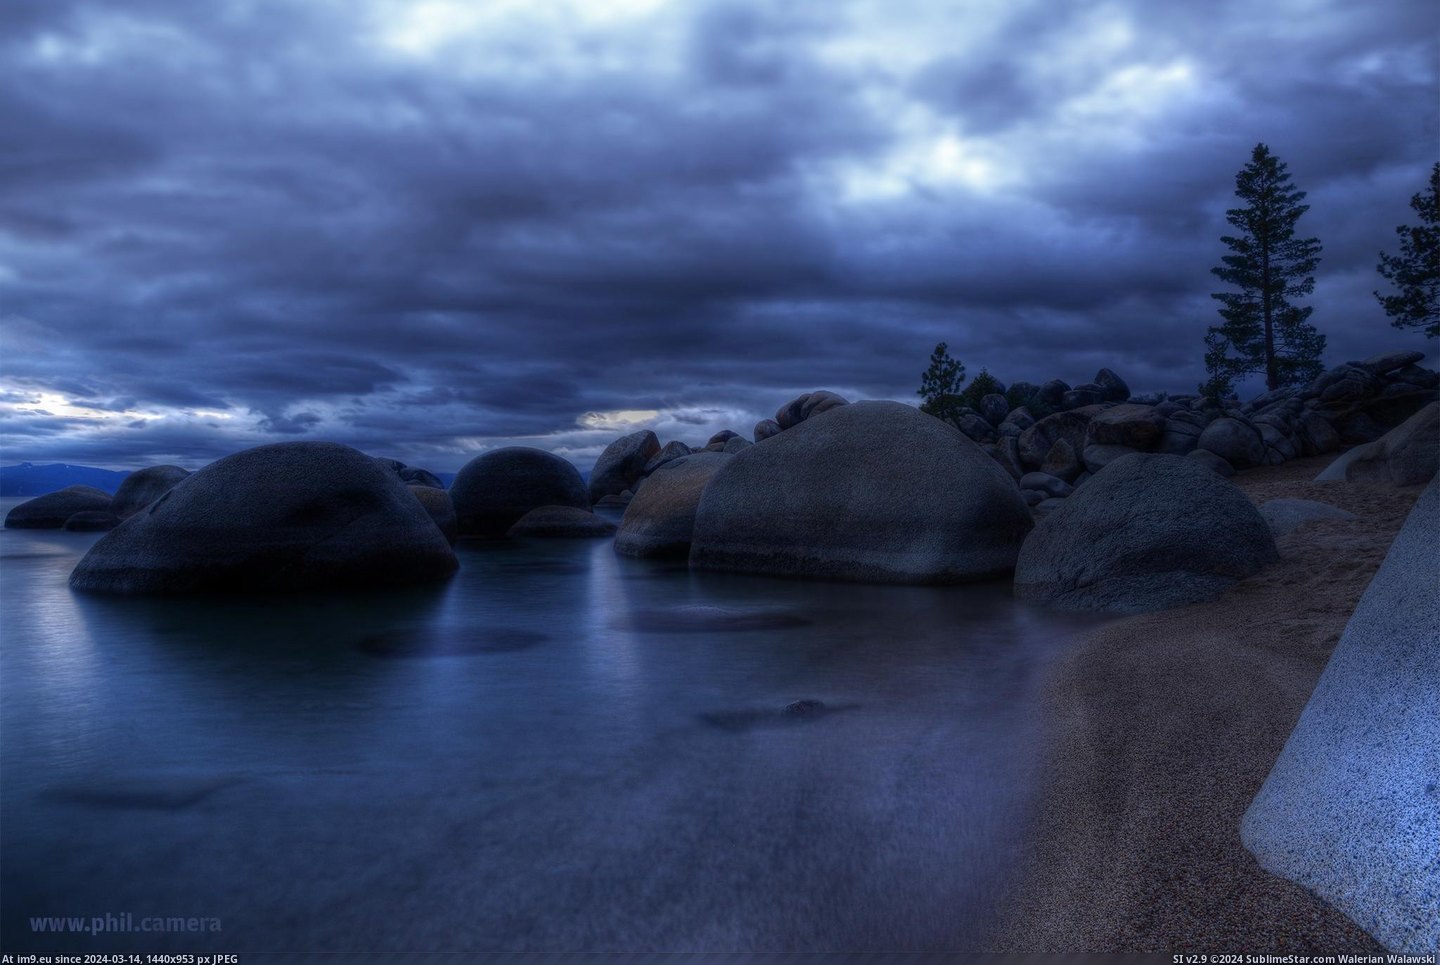 #Lake #Water #East #Skies #2048x1367 #Tahoe #Surreal #Shore [Earthporn] Stilled Water and Surreal Skies over east shore, Lake Tahoe, last weeked [oc][2048x1367] Pic. (Image of album My r/EARTHPORN favs))